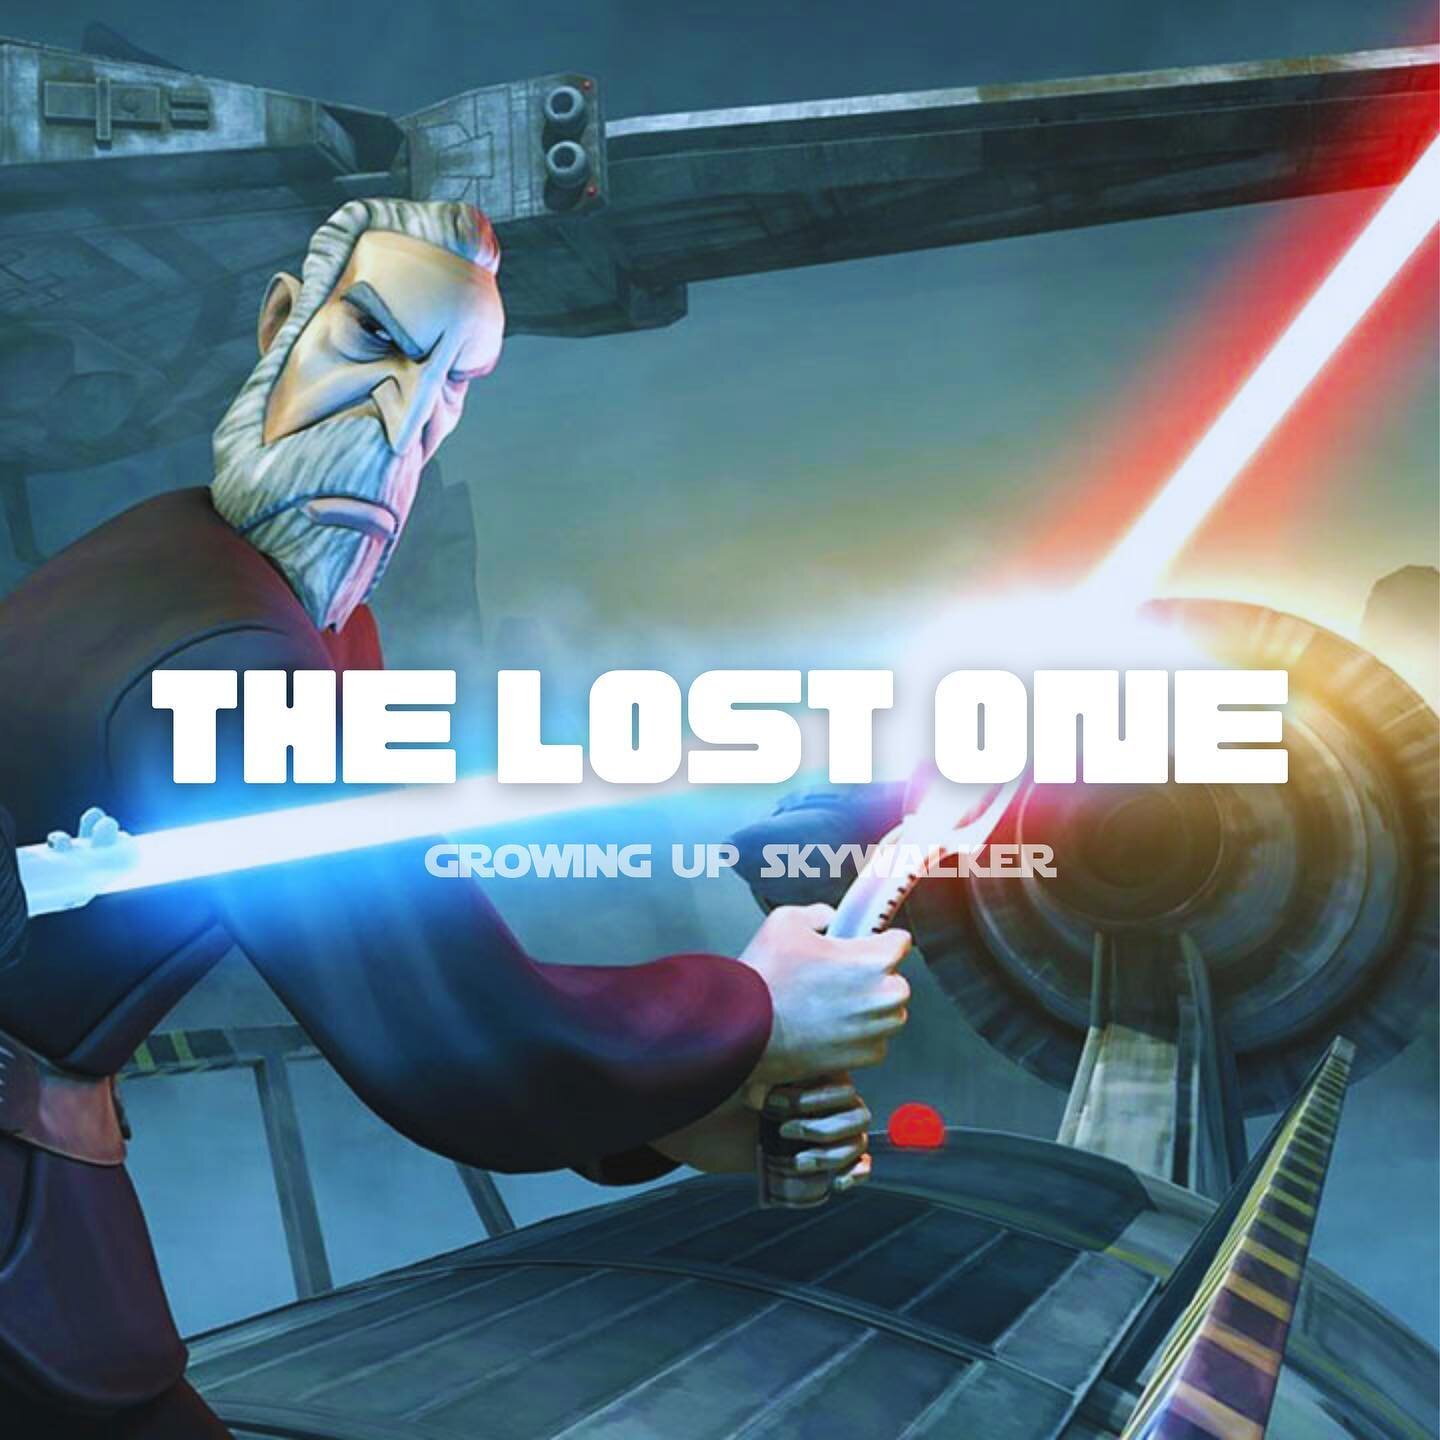 ✨New episode!✨

This is the one where the Jedi Council remembers they never bothered to have a funeral for Sifo-Dyas.

We jest. &ldquo;The Lost One&rdquo; (The Clone Wars 6.10) is a dense and beautiful foreshadowing for the events of Revenge of the S